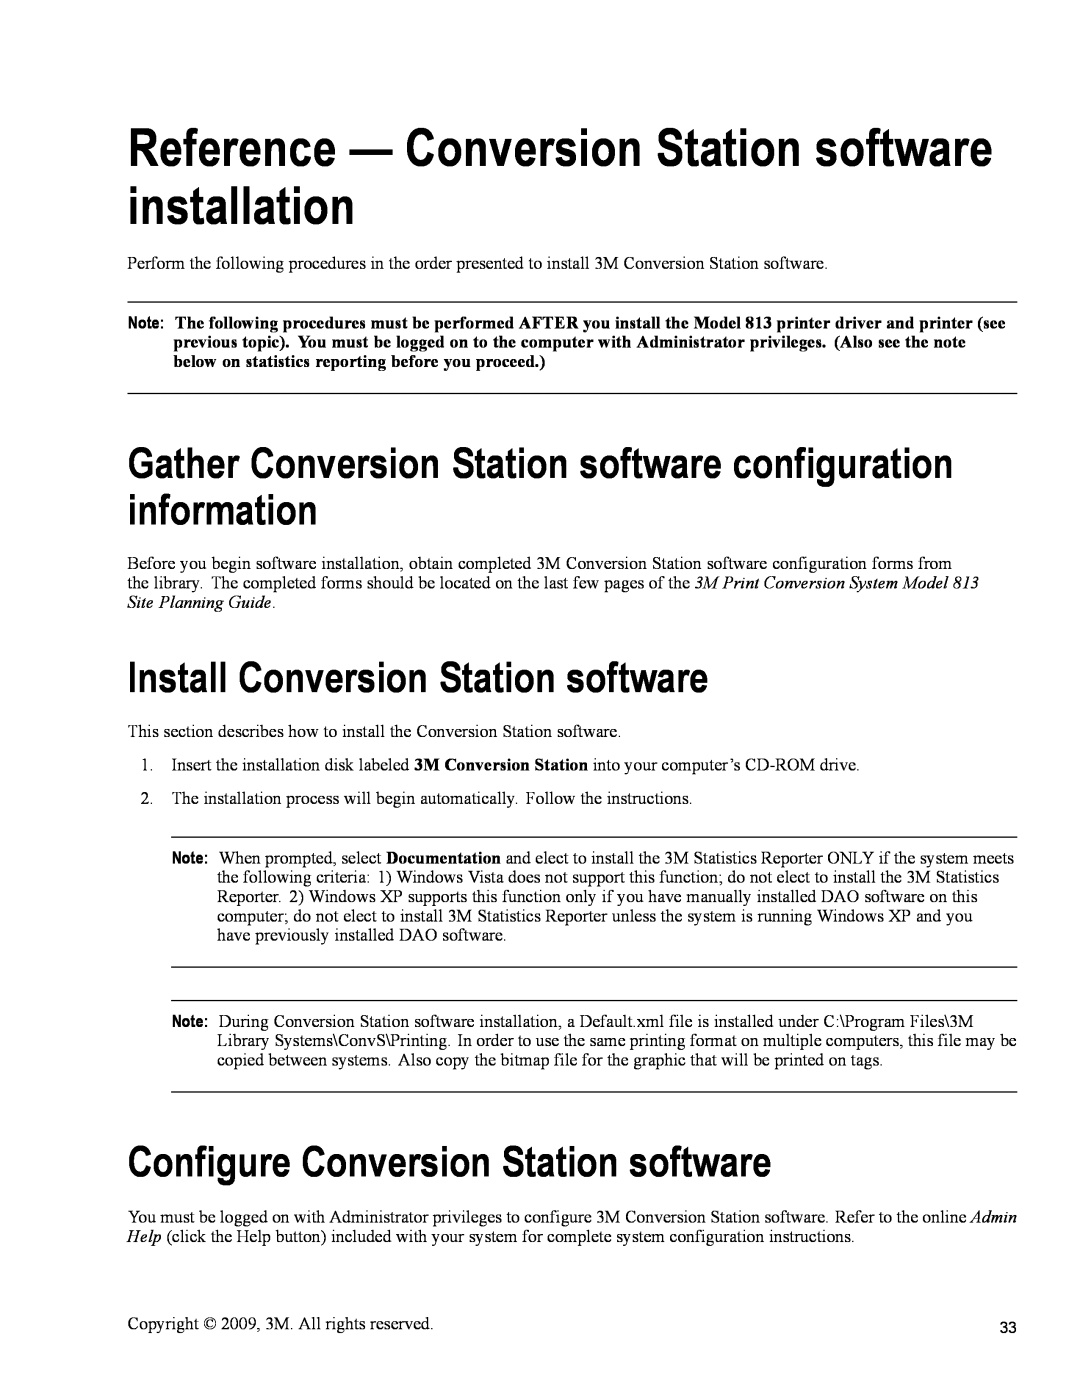 3M 813 Reference - Conversion Station software installation, Gather Conversion Station software configuration information 